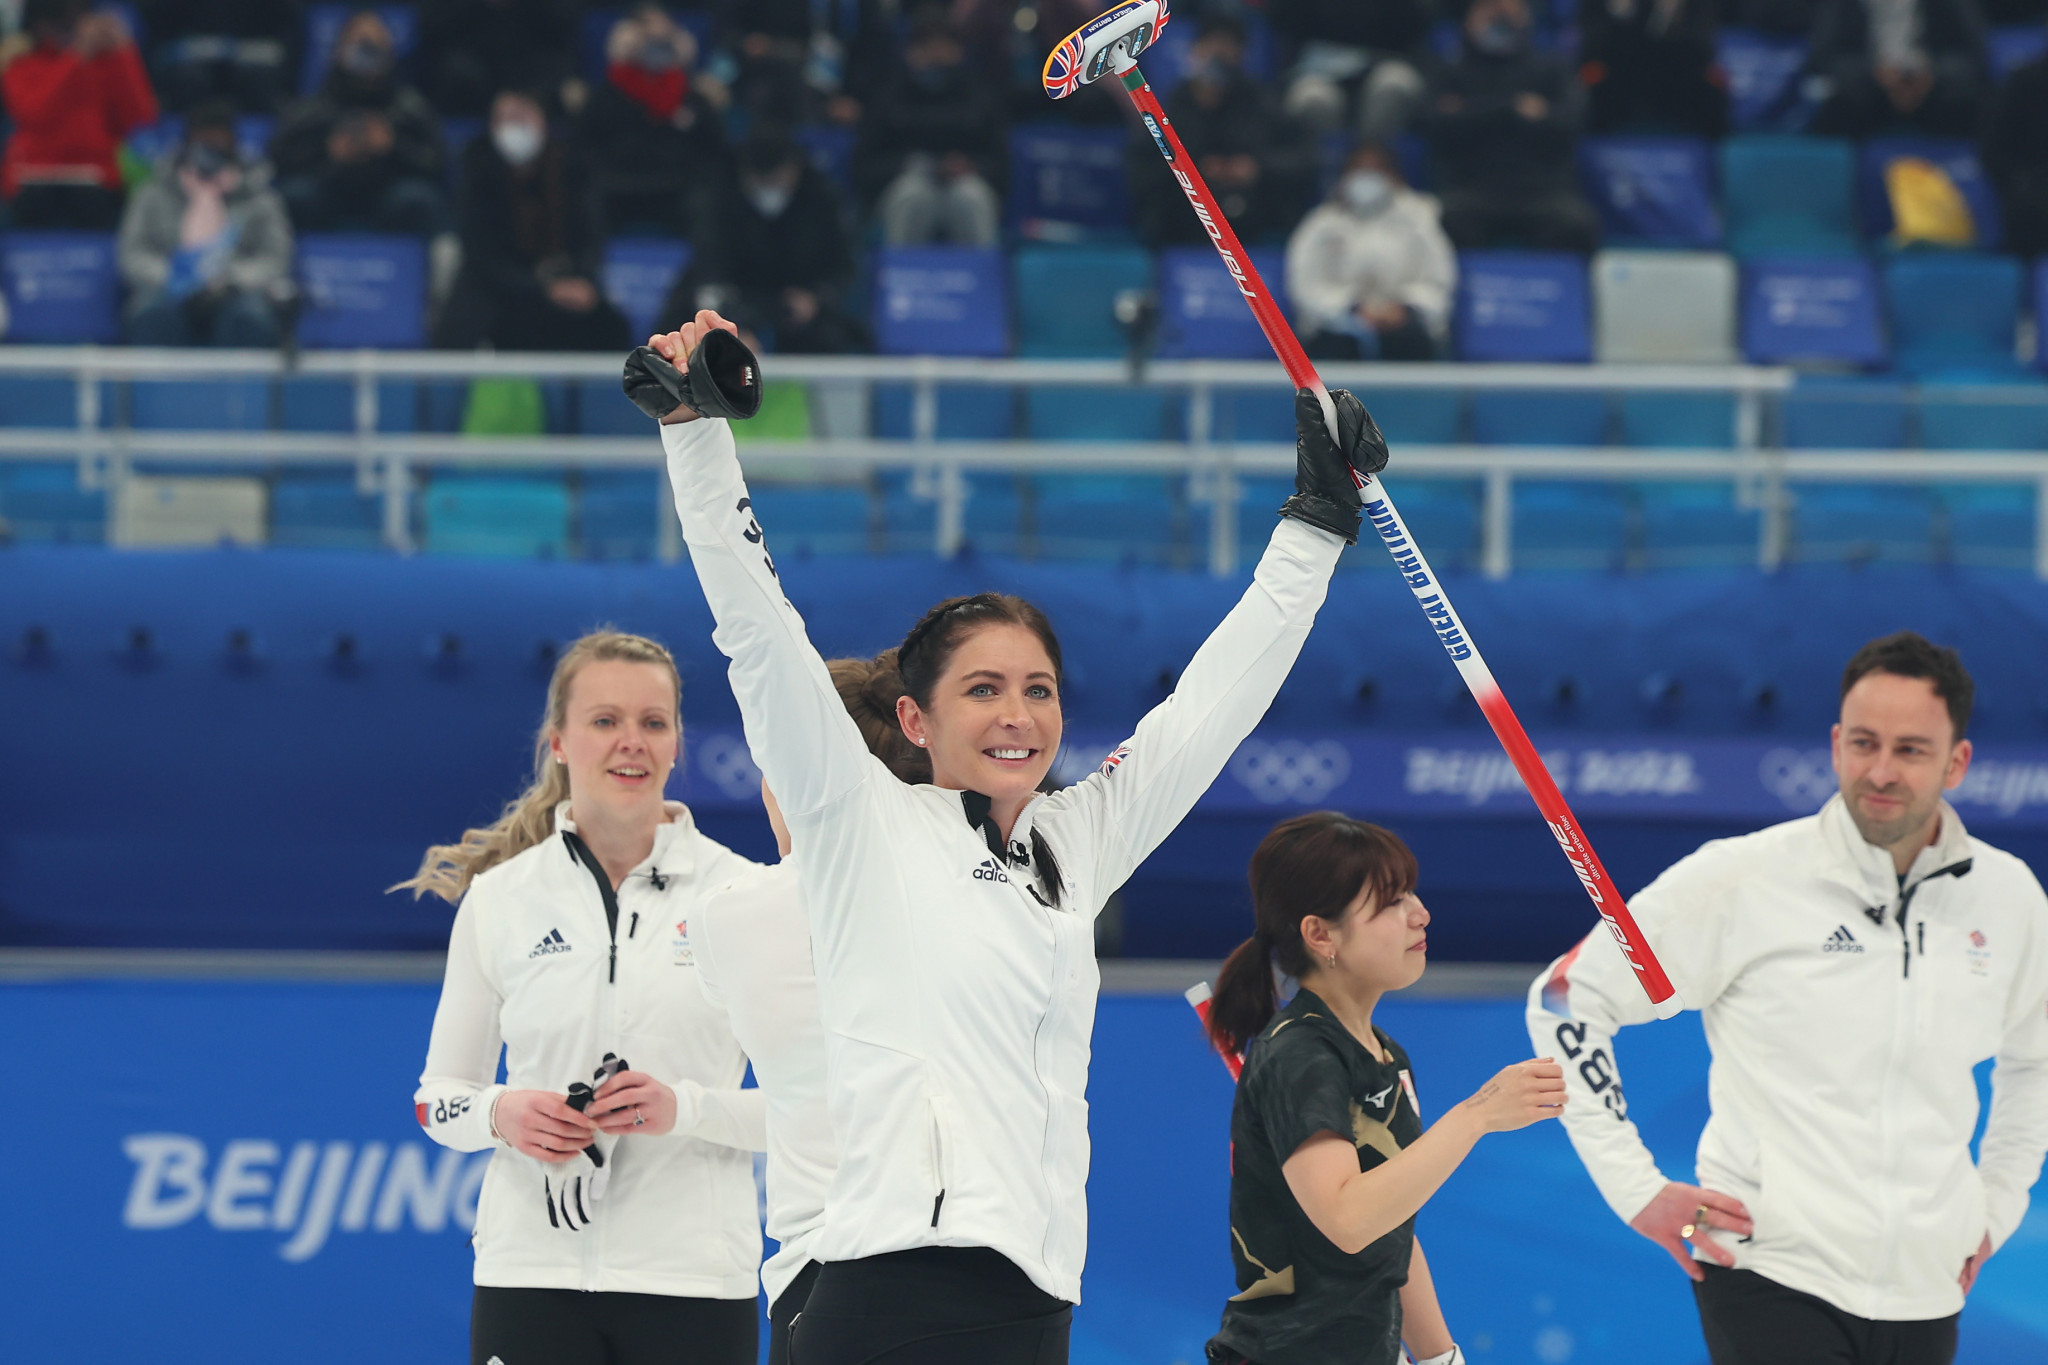 Britain win Olympic curling gold for first time in 20 years as Muirhead finally tastes victory